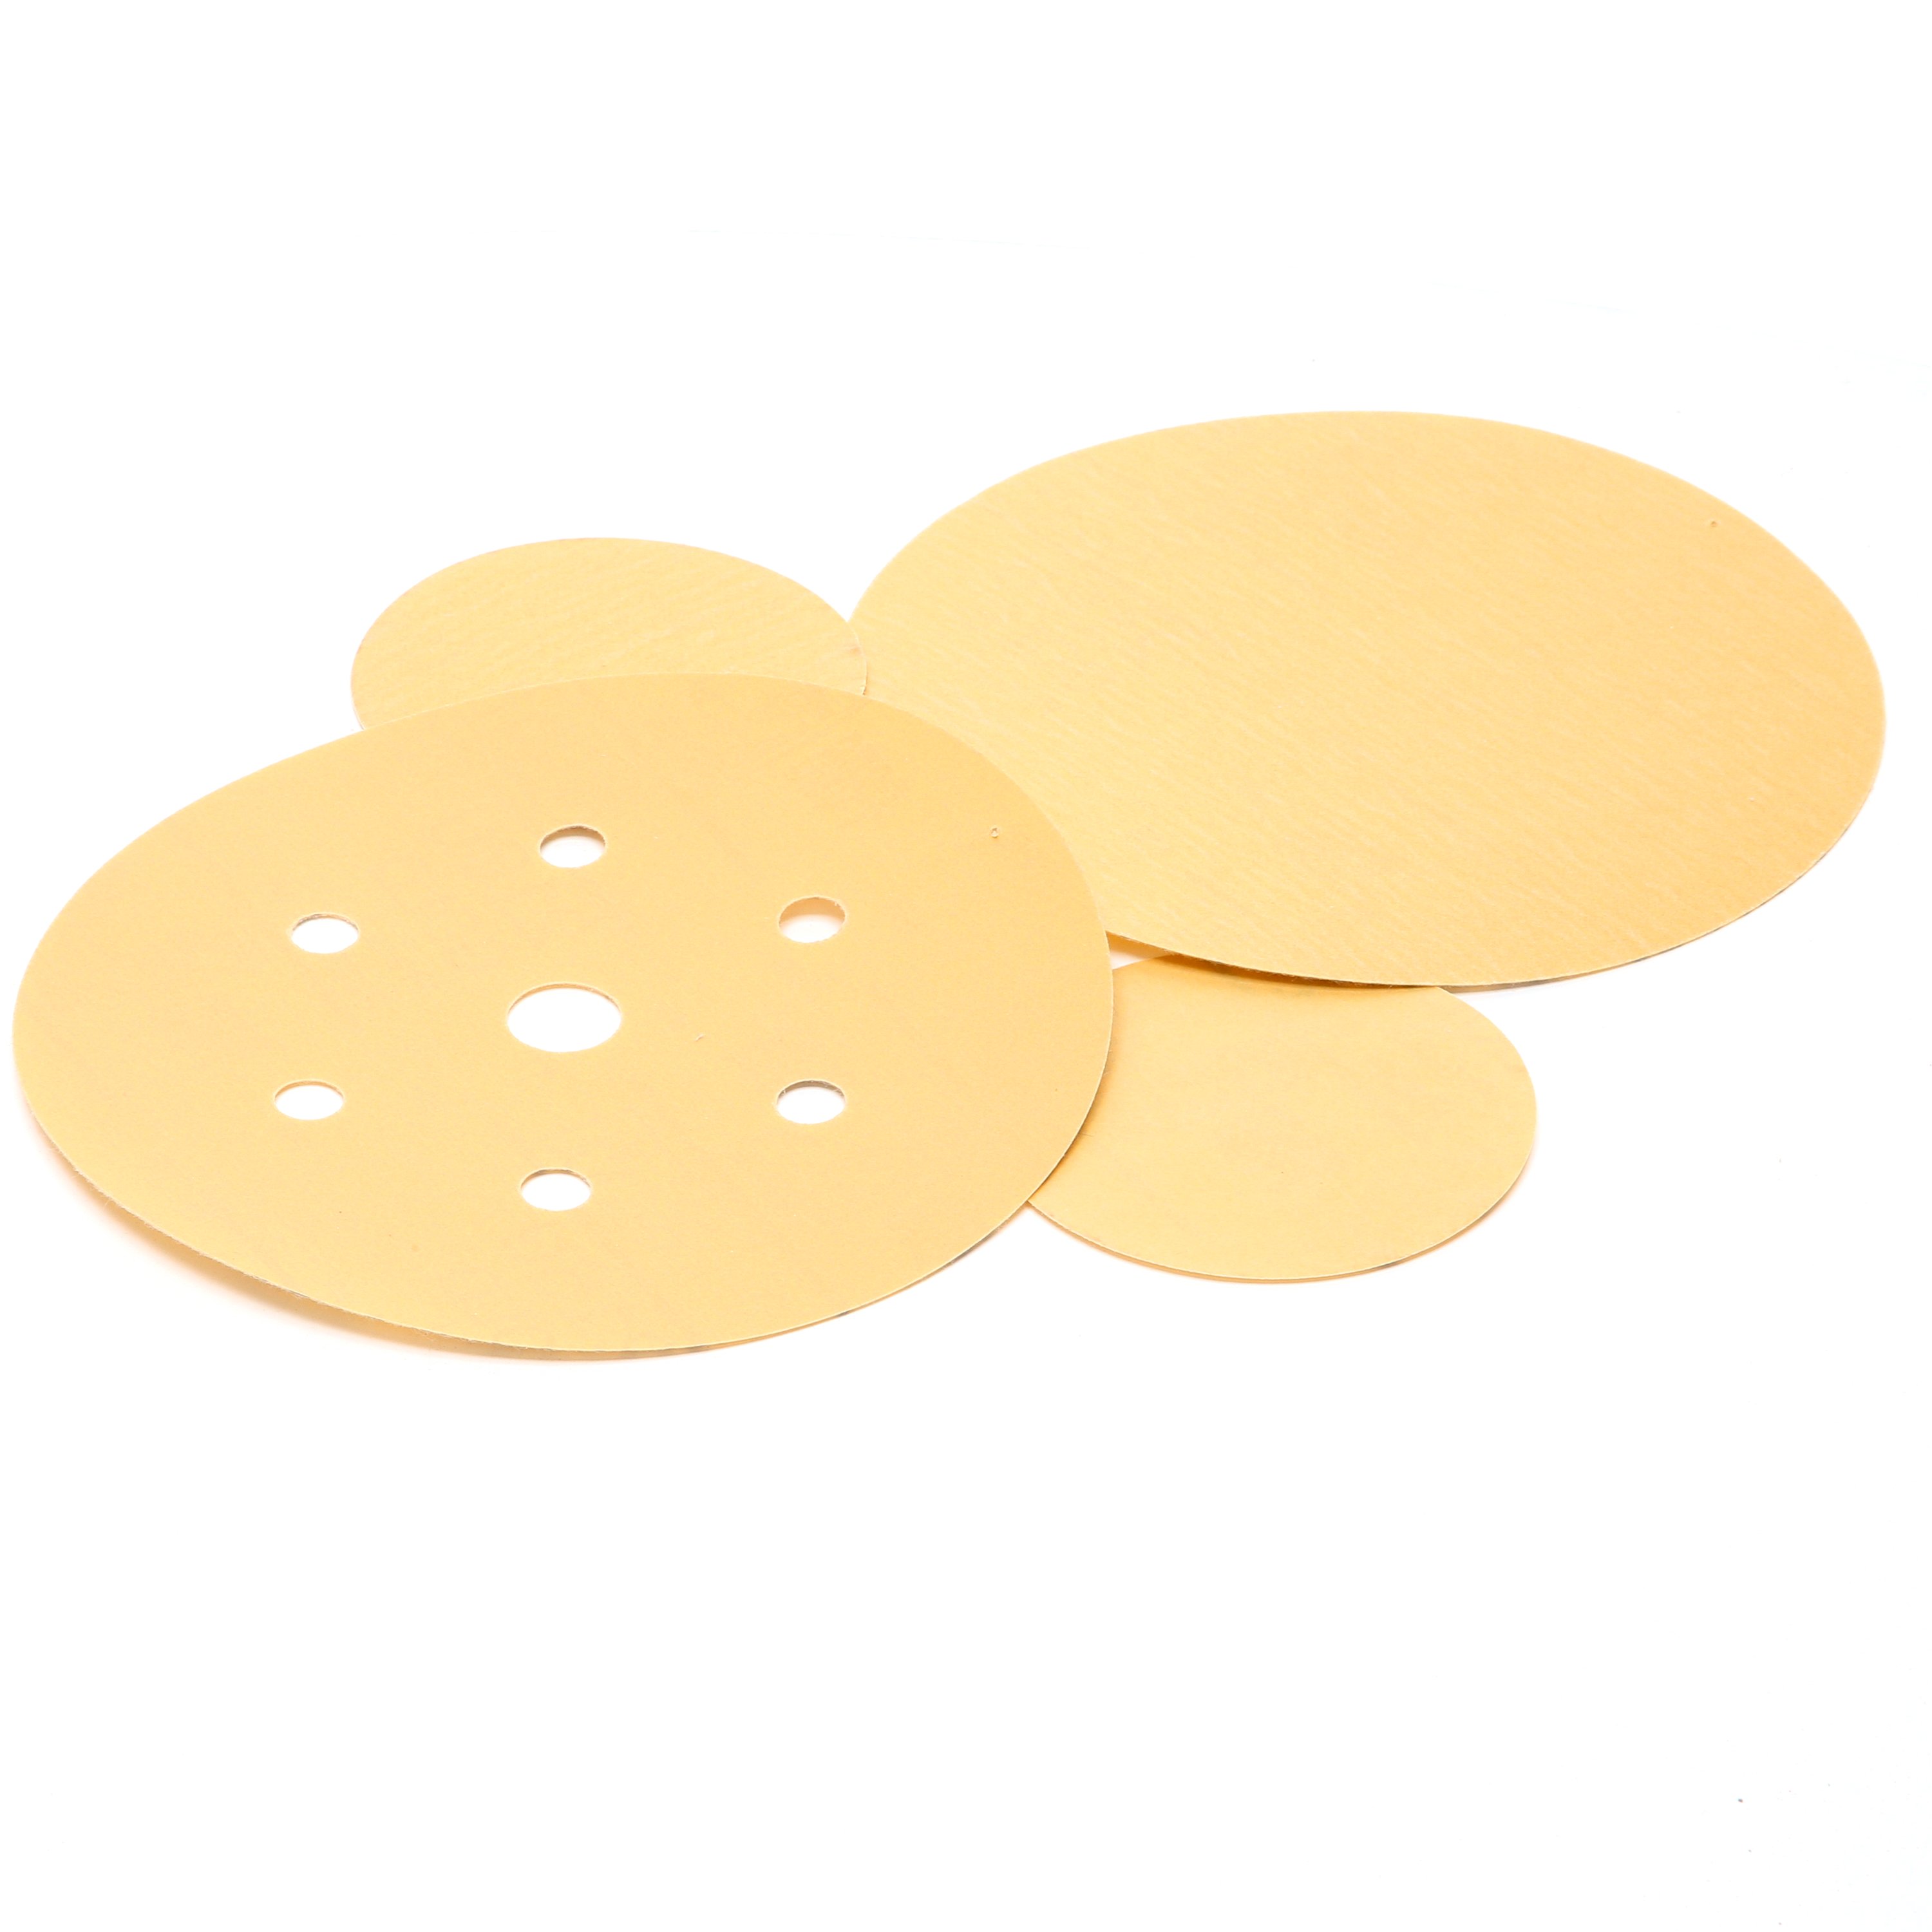 With its open coat construction and aluminum oxide mineral abrasive, 3M™ Hookit™ Gold Disc 216U provides a sharp cut — more aggressive than a comparable closed coat abrasive of the same grade — without dust accumulating on the disc